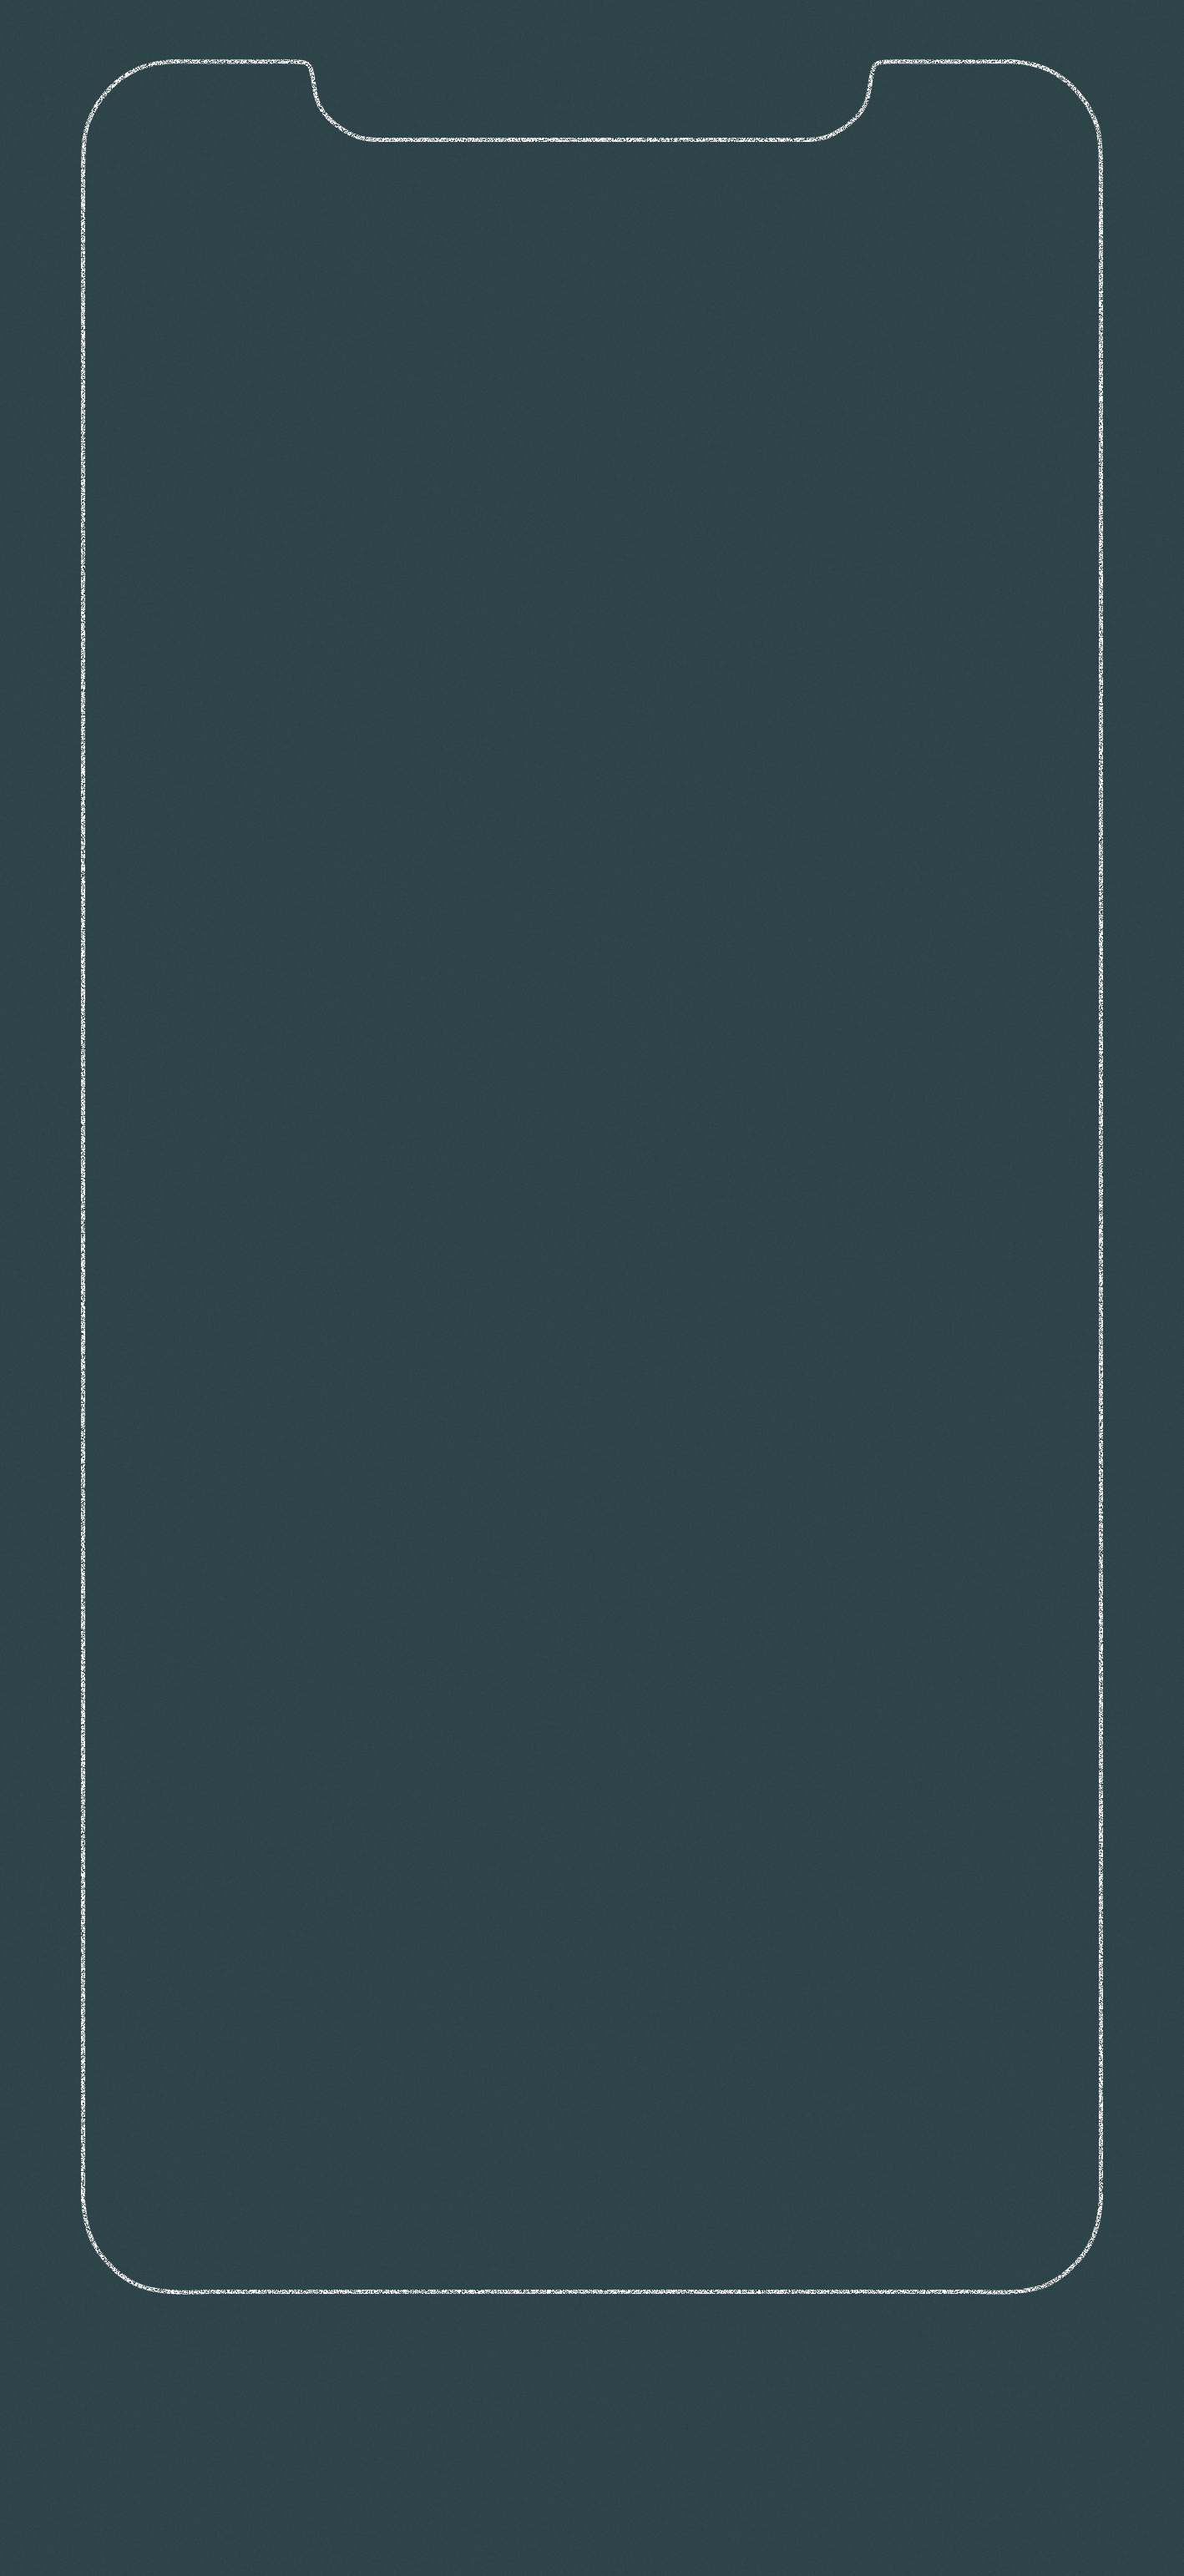 iPhone XS Max Outline Wallpaper. iPhone wallpaper image, Colourful wallpaper iphone, iPhone homescreen wallpaper